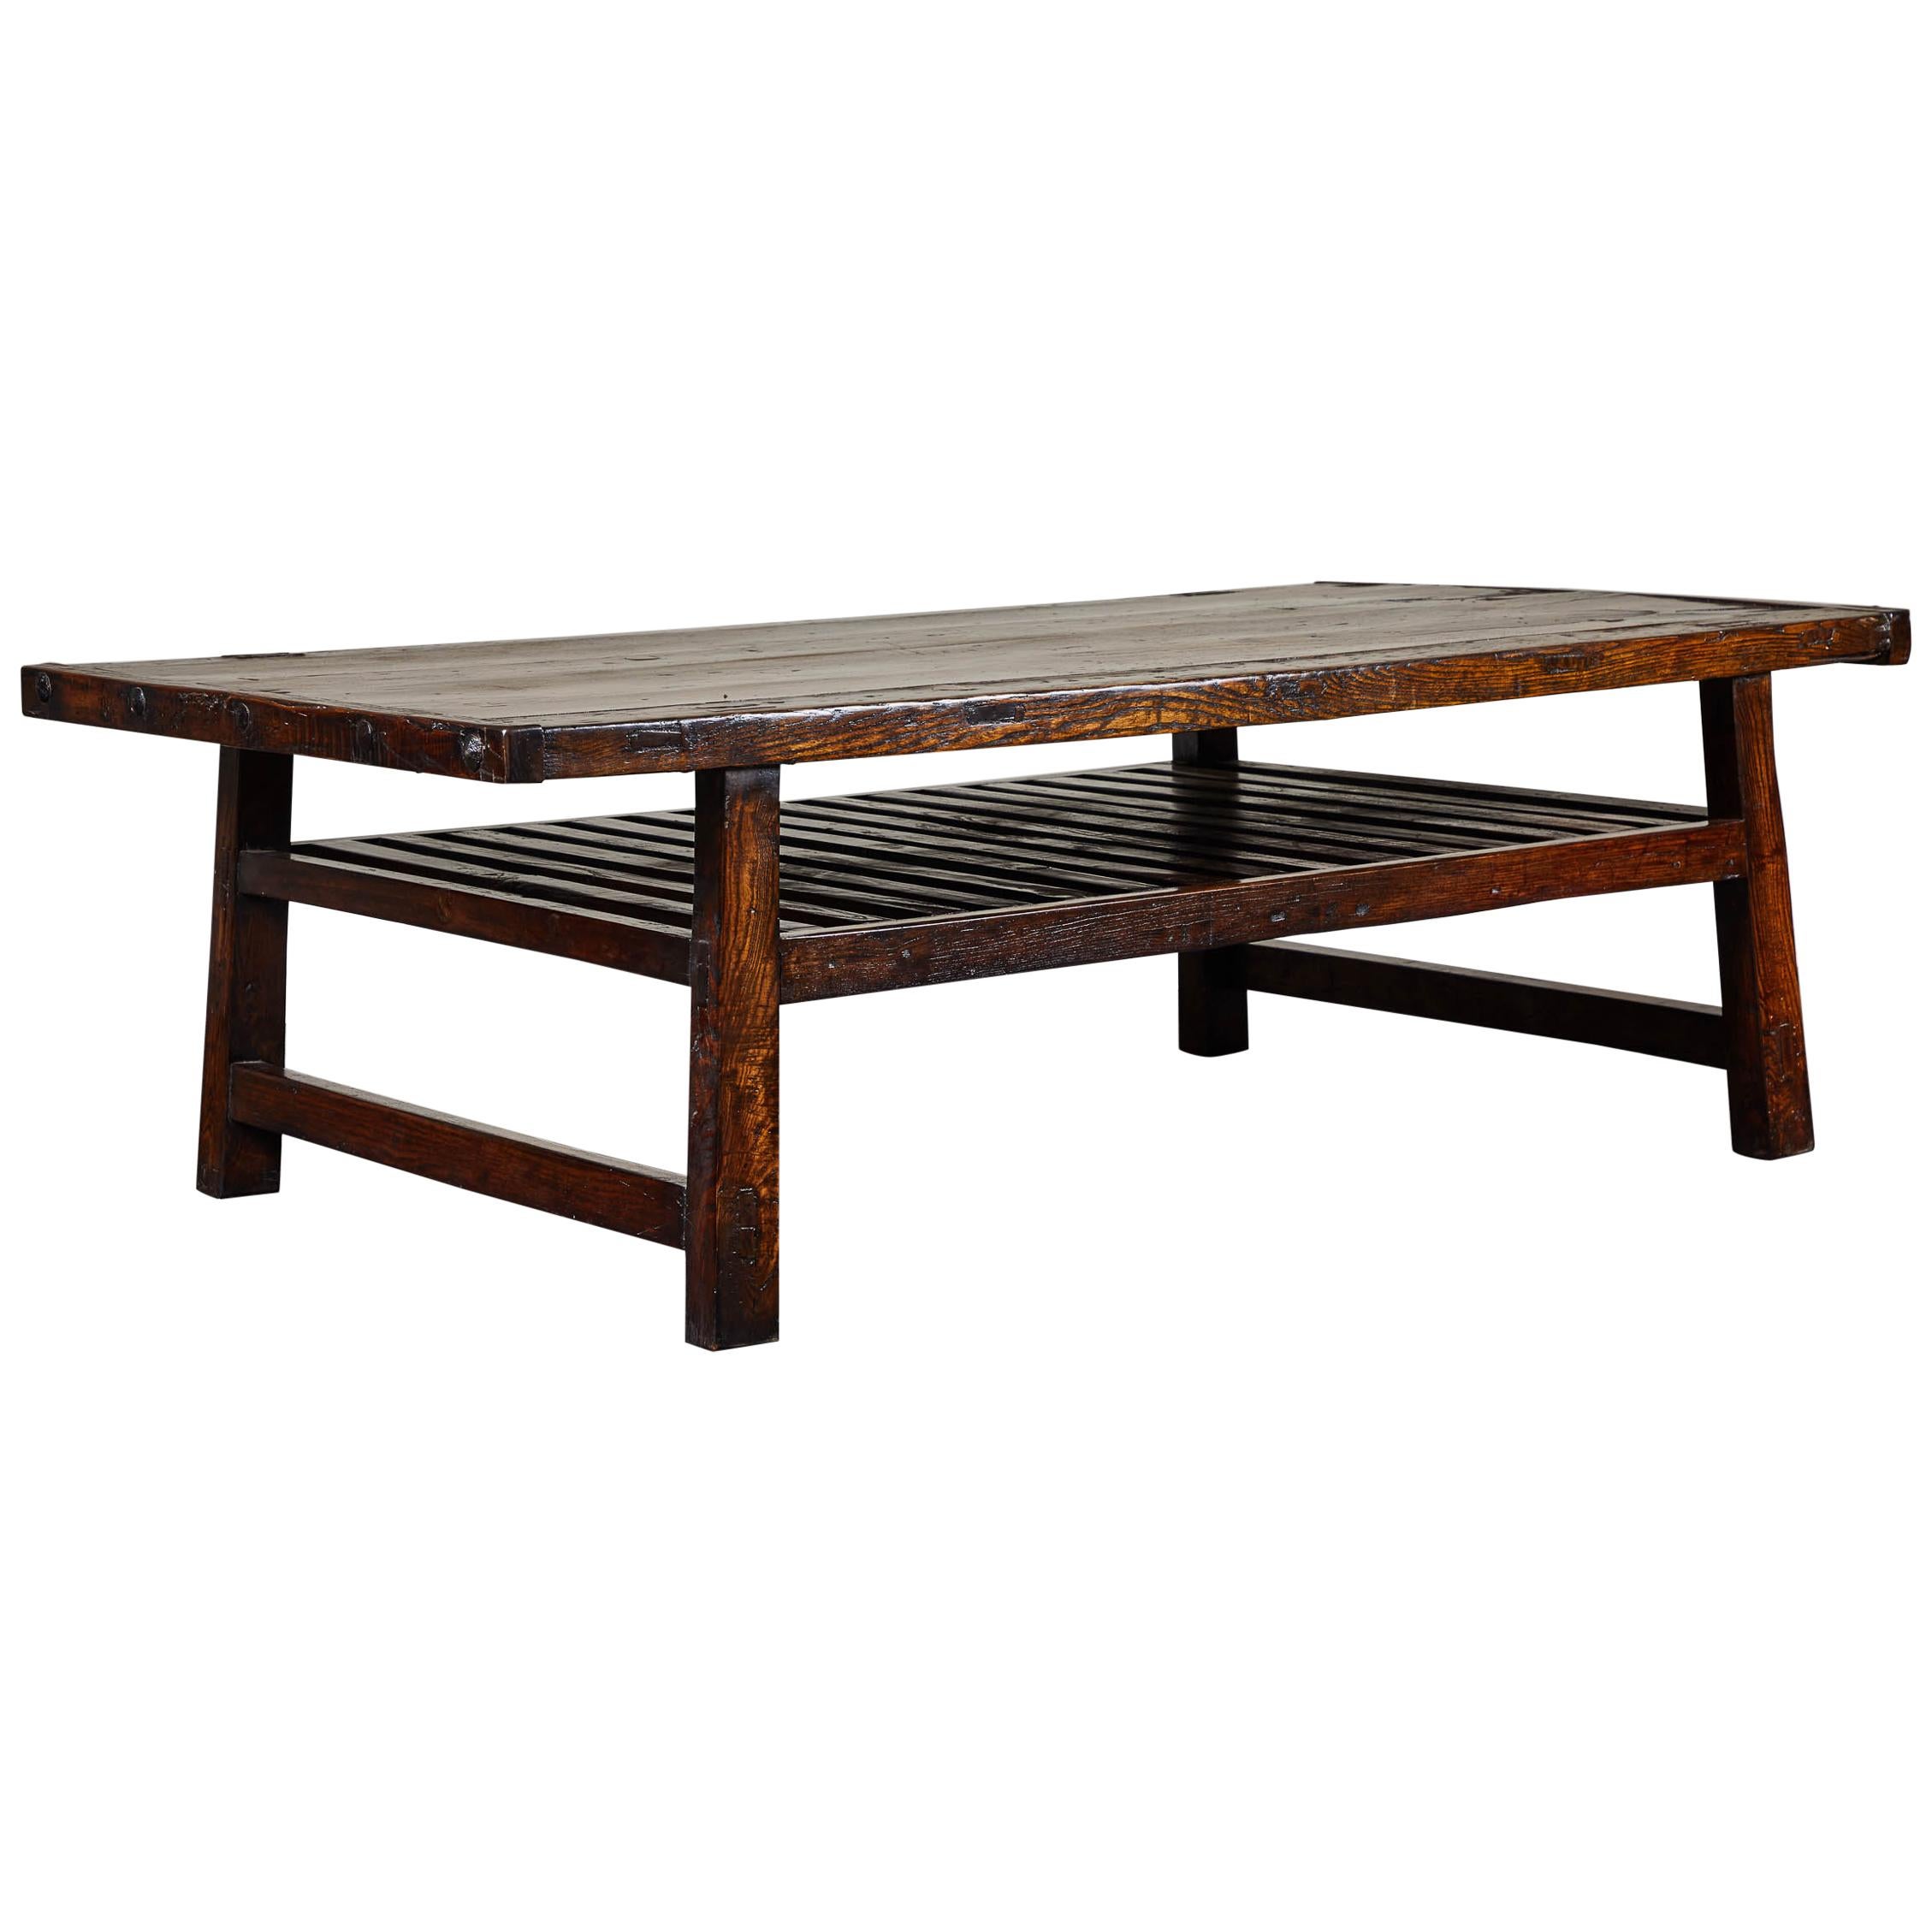 Chinese Coffee Table with Slatted Shelf For Sale